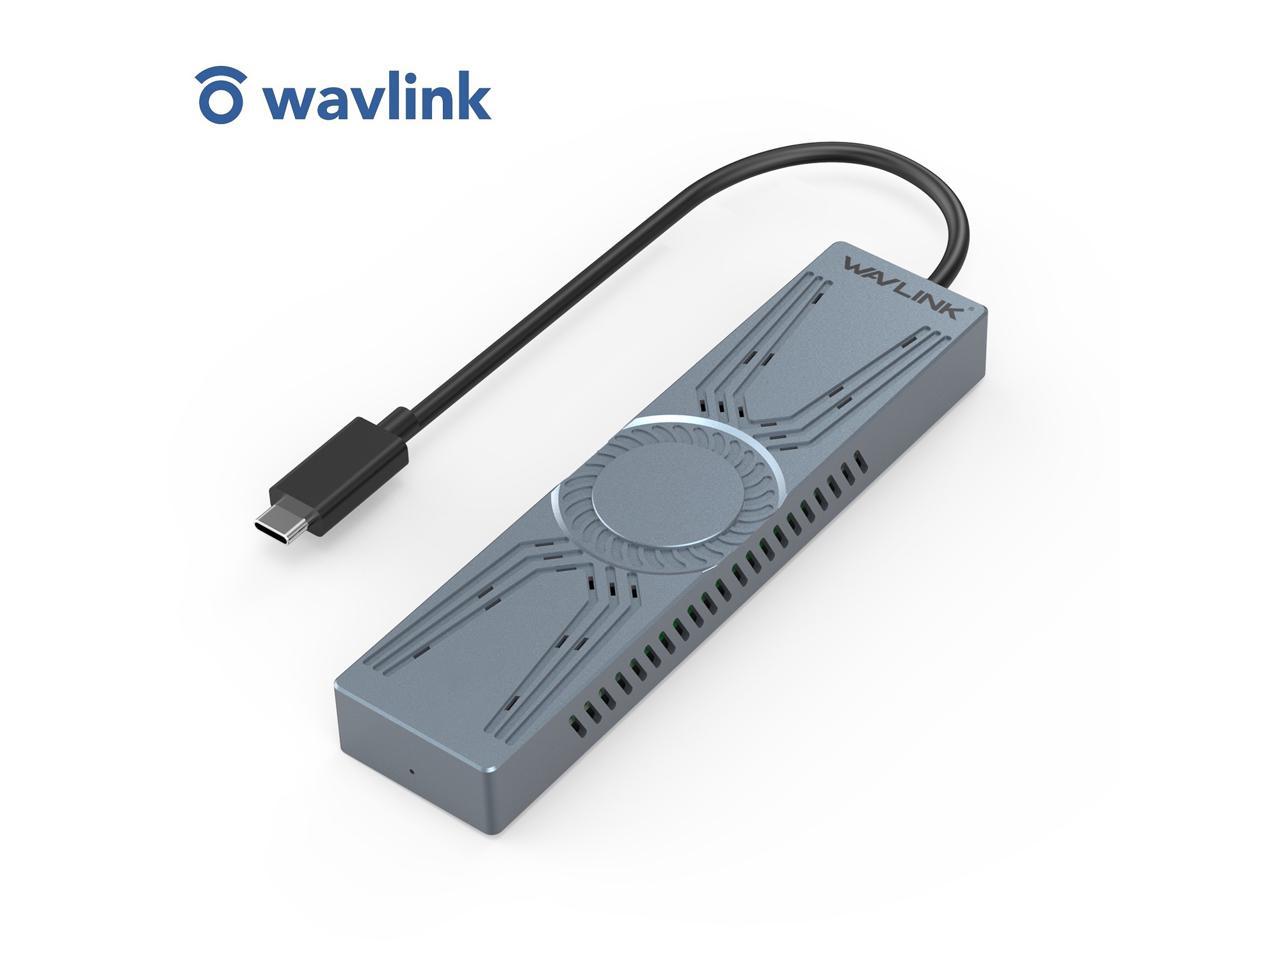 Wavlink M.2 Enclosure for PCIe NVMe SSD, Thunderbolt 3 40Gbps Type-C